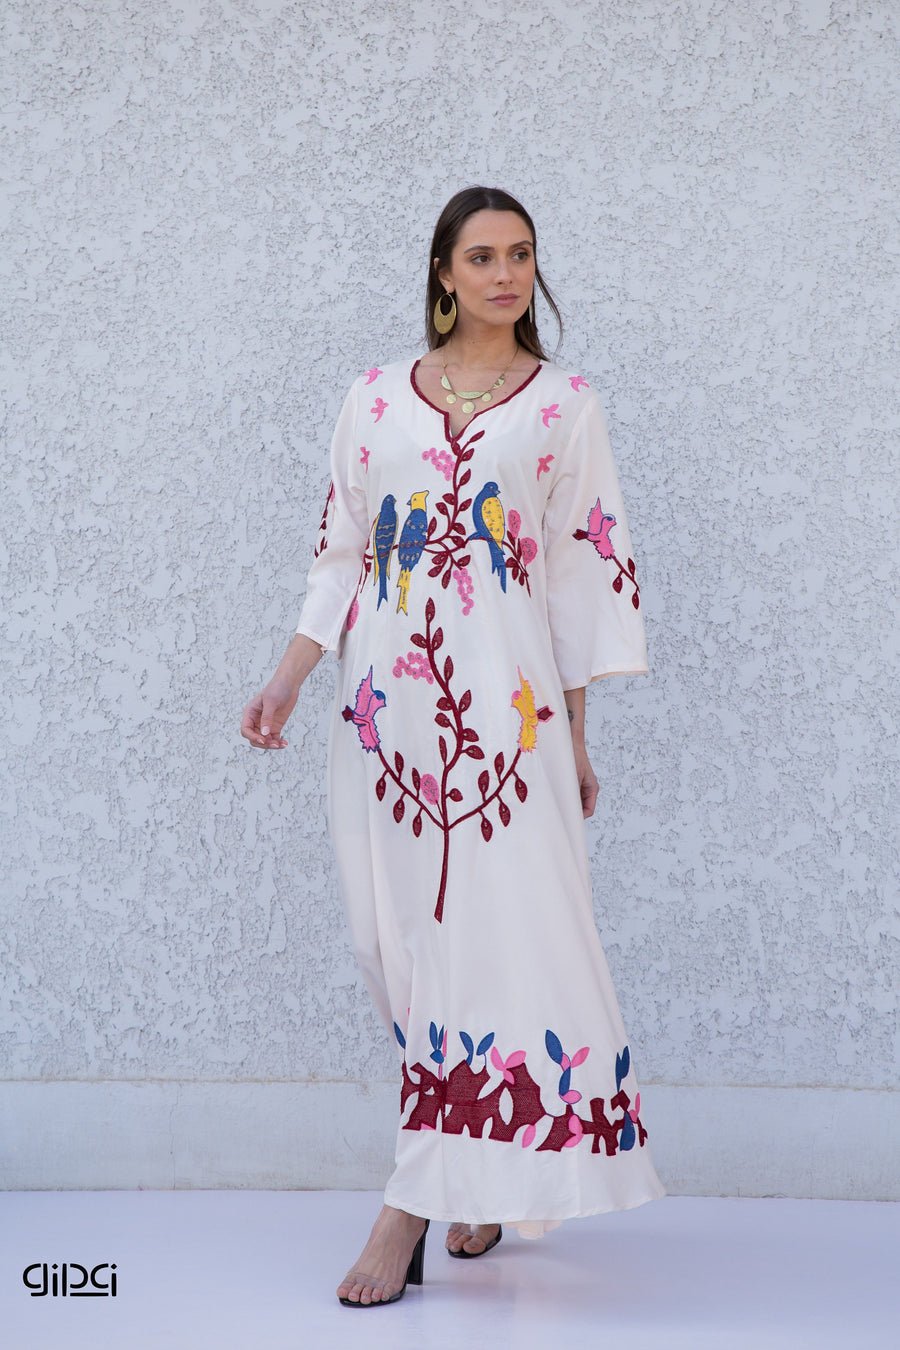 Beautiful Off white embroidered cotton caftan dress, caftans for women, summer kaftan, Chic embroidered caftan, High quality Egyptian cotton